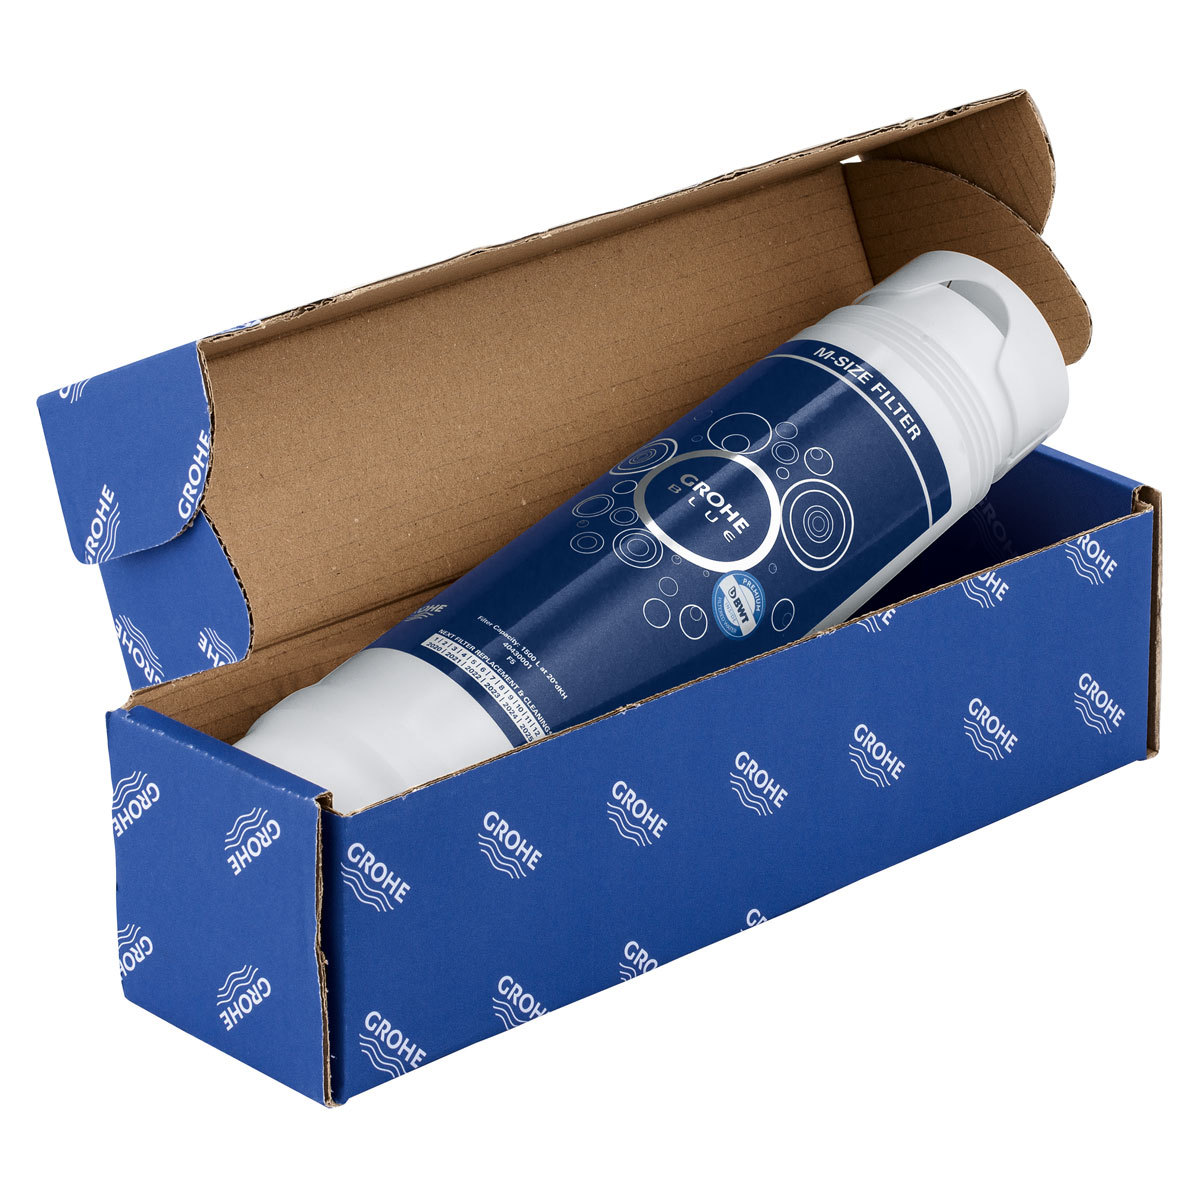 Cut out image of Grohe Filter in box on white background